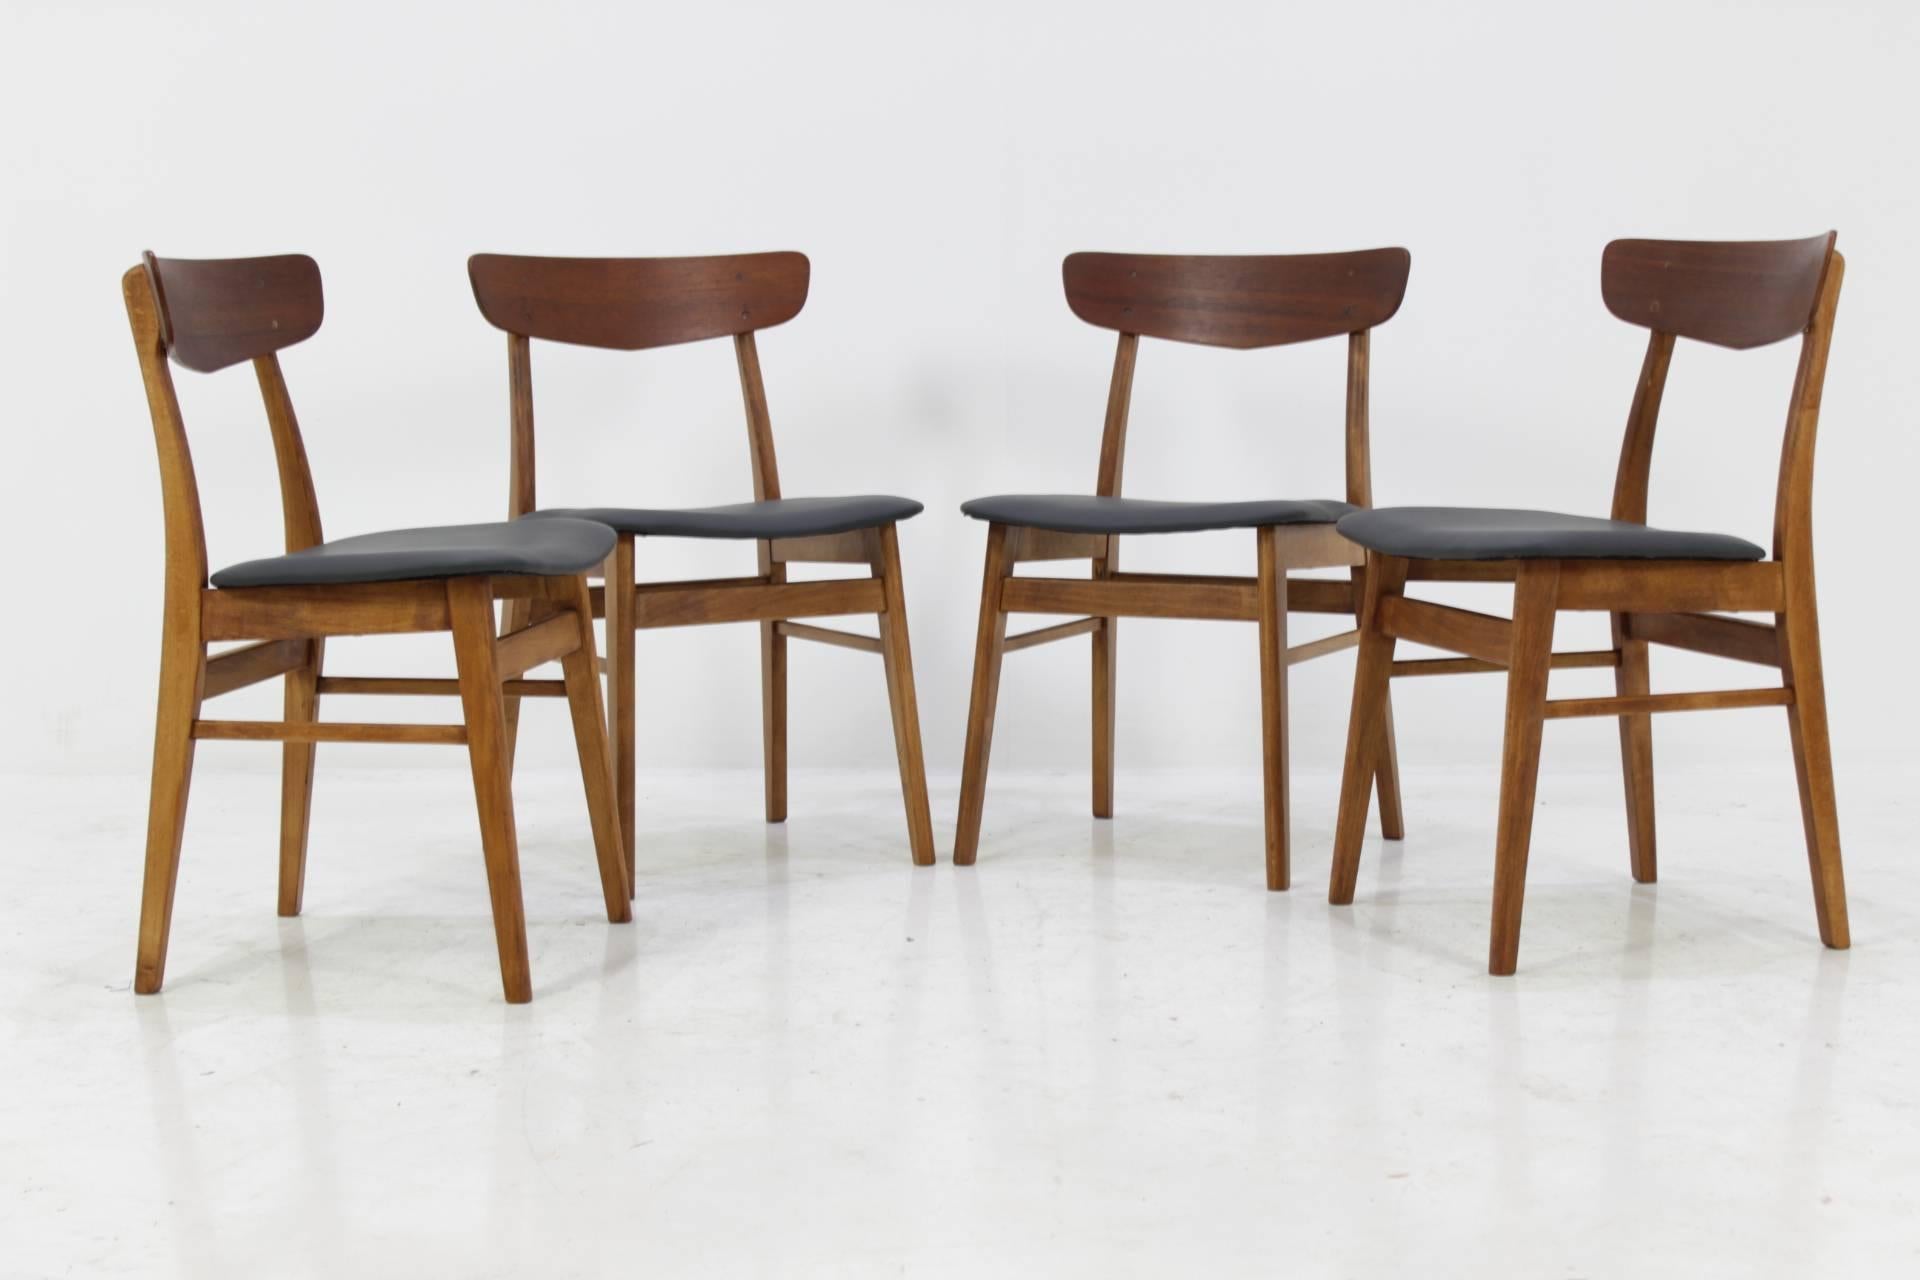 Oiled Set of Four Danish Teak Dining Chairs Made in Denmark, circa 1960